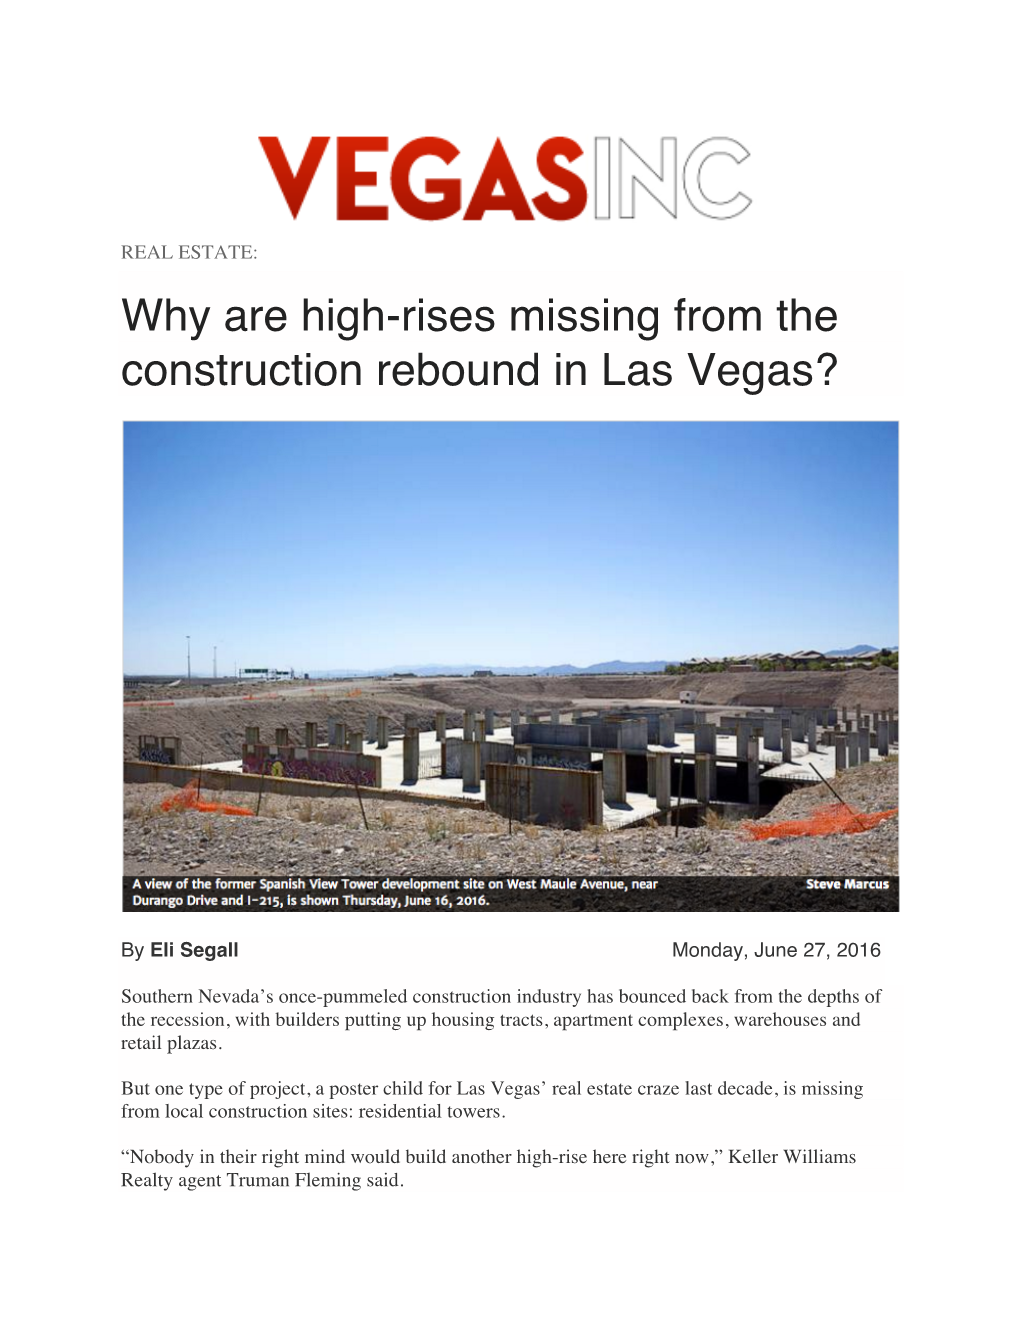 Why Are High-Rises Missing from the Construction Rebound in Las Vegas?